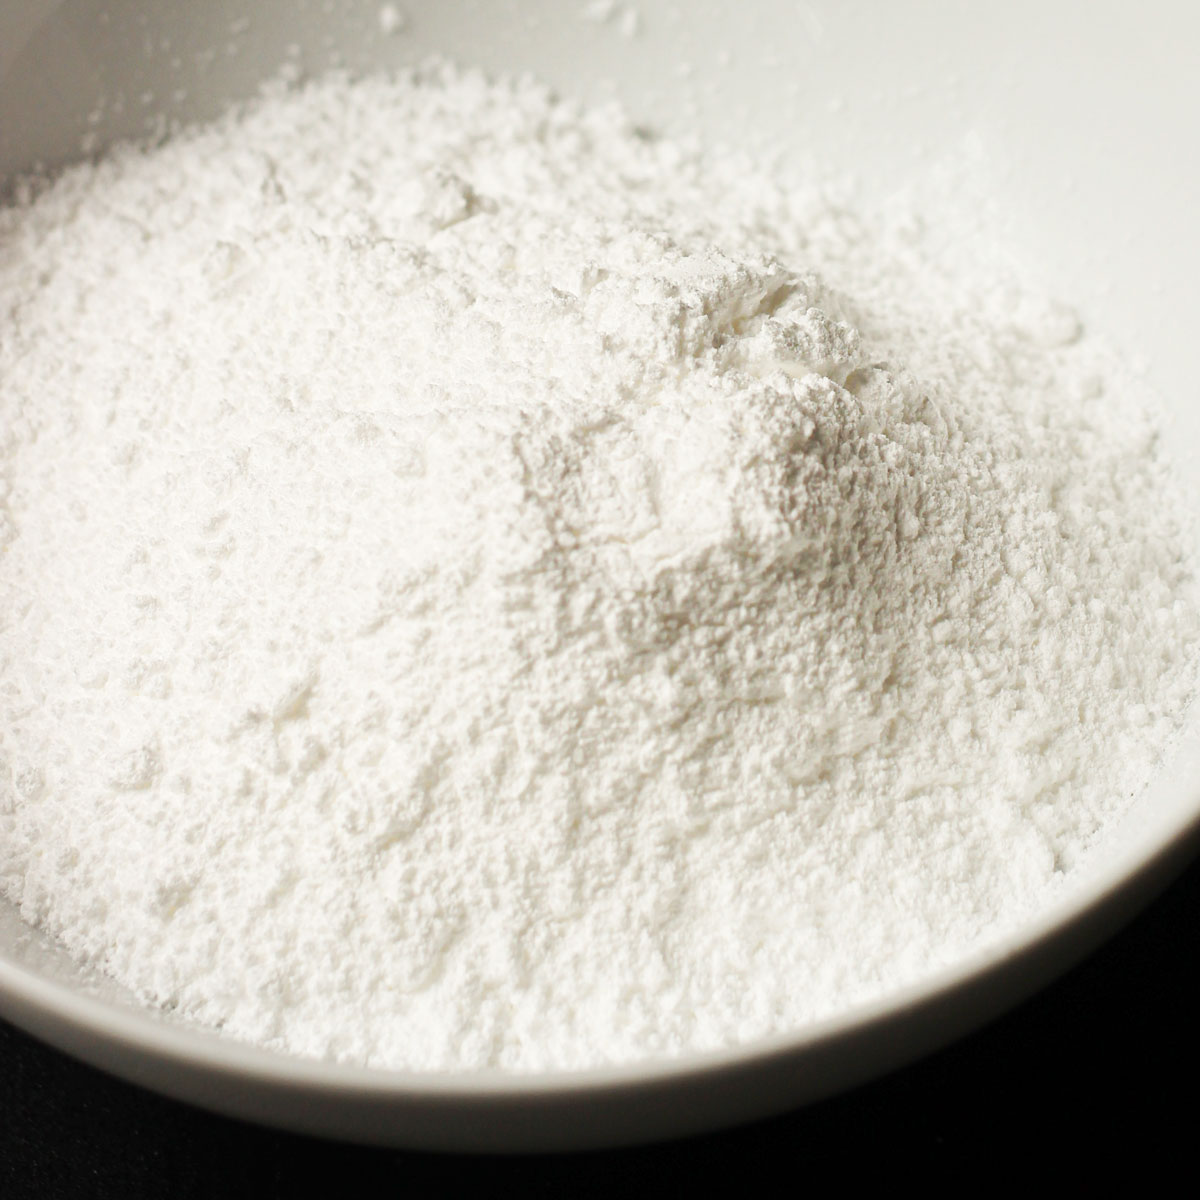 homemade powdered sugar in a white bowl on a black table top.